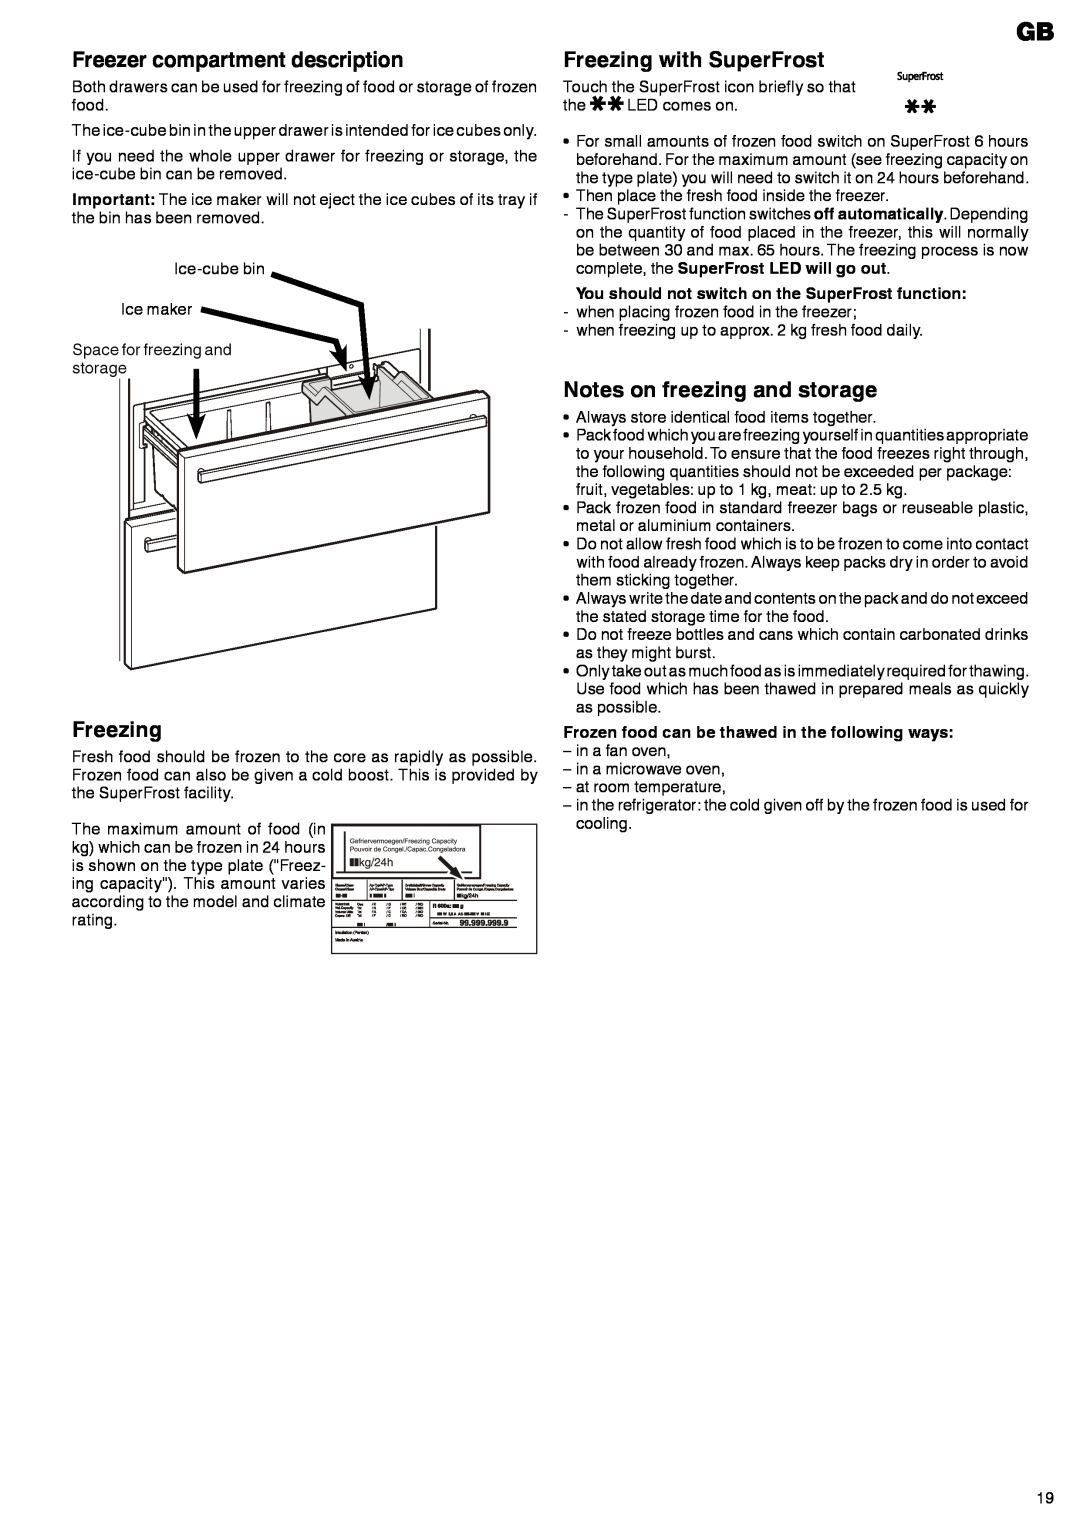 Liebherr 7082 135-00 manual Freezer compartment description, Freezing with SuperFrost, Notes on freezing and storage 